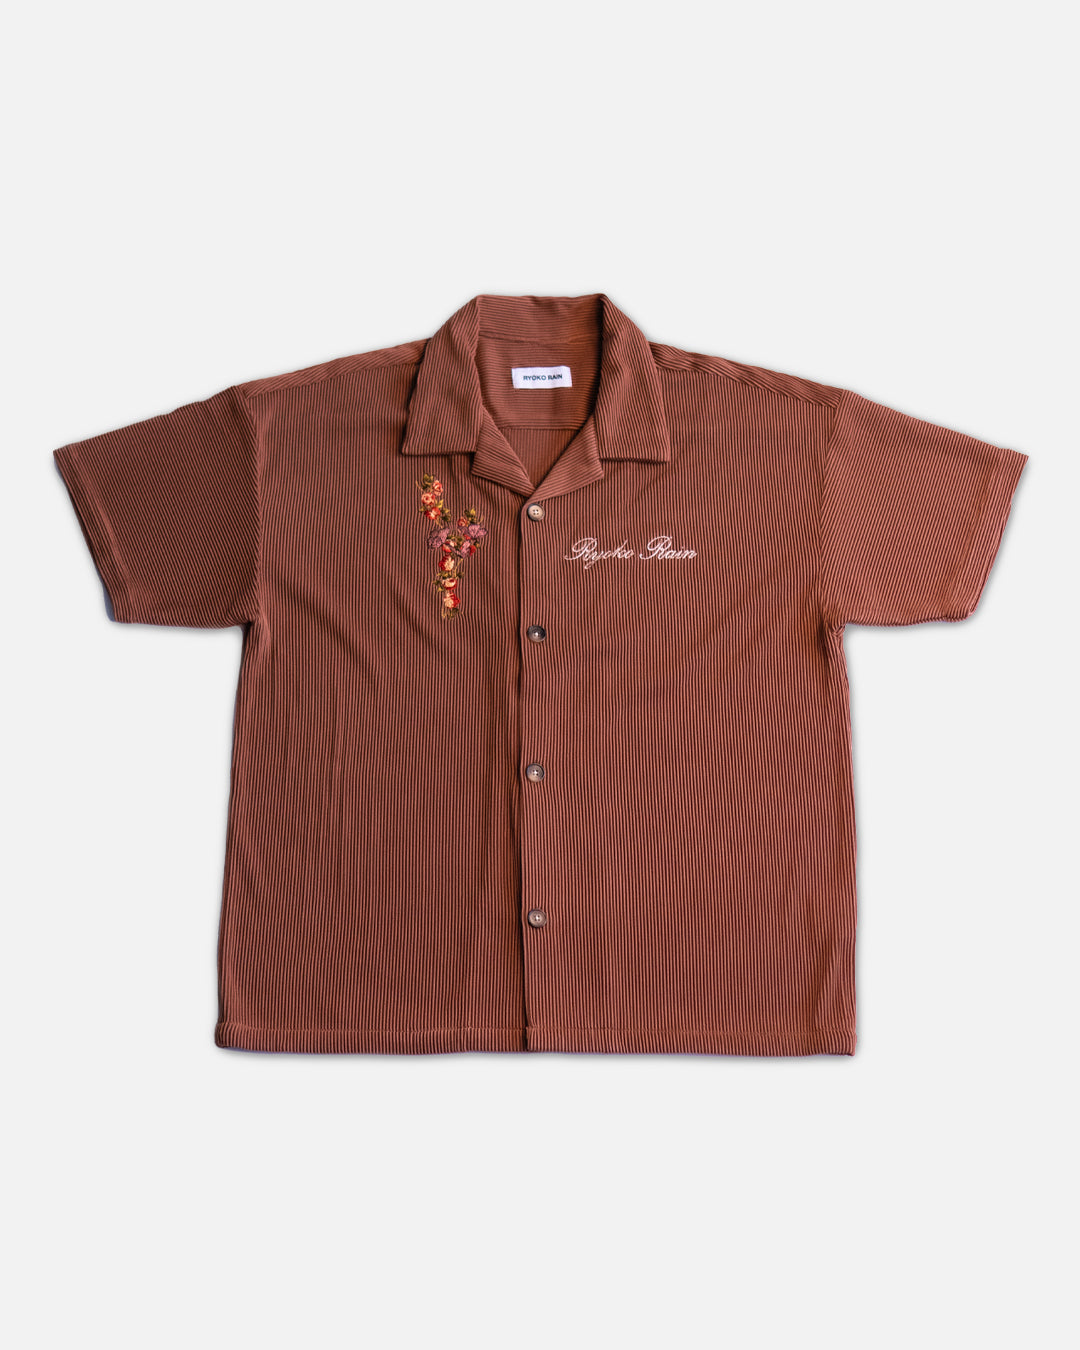 PLEATED BUTTON UP - COCOA